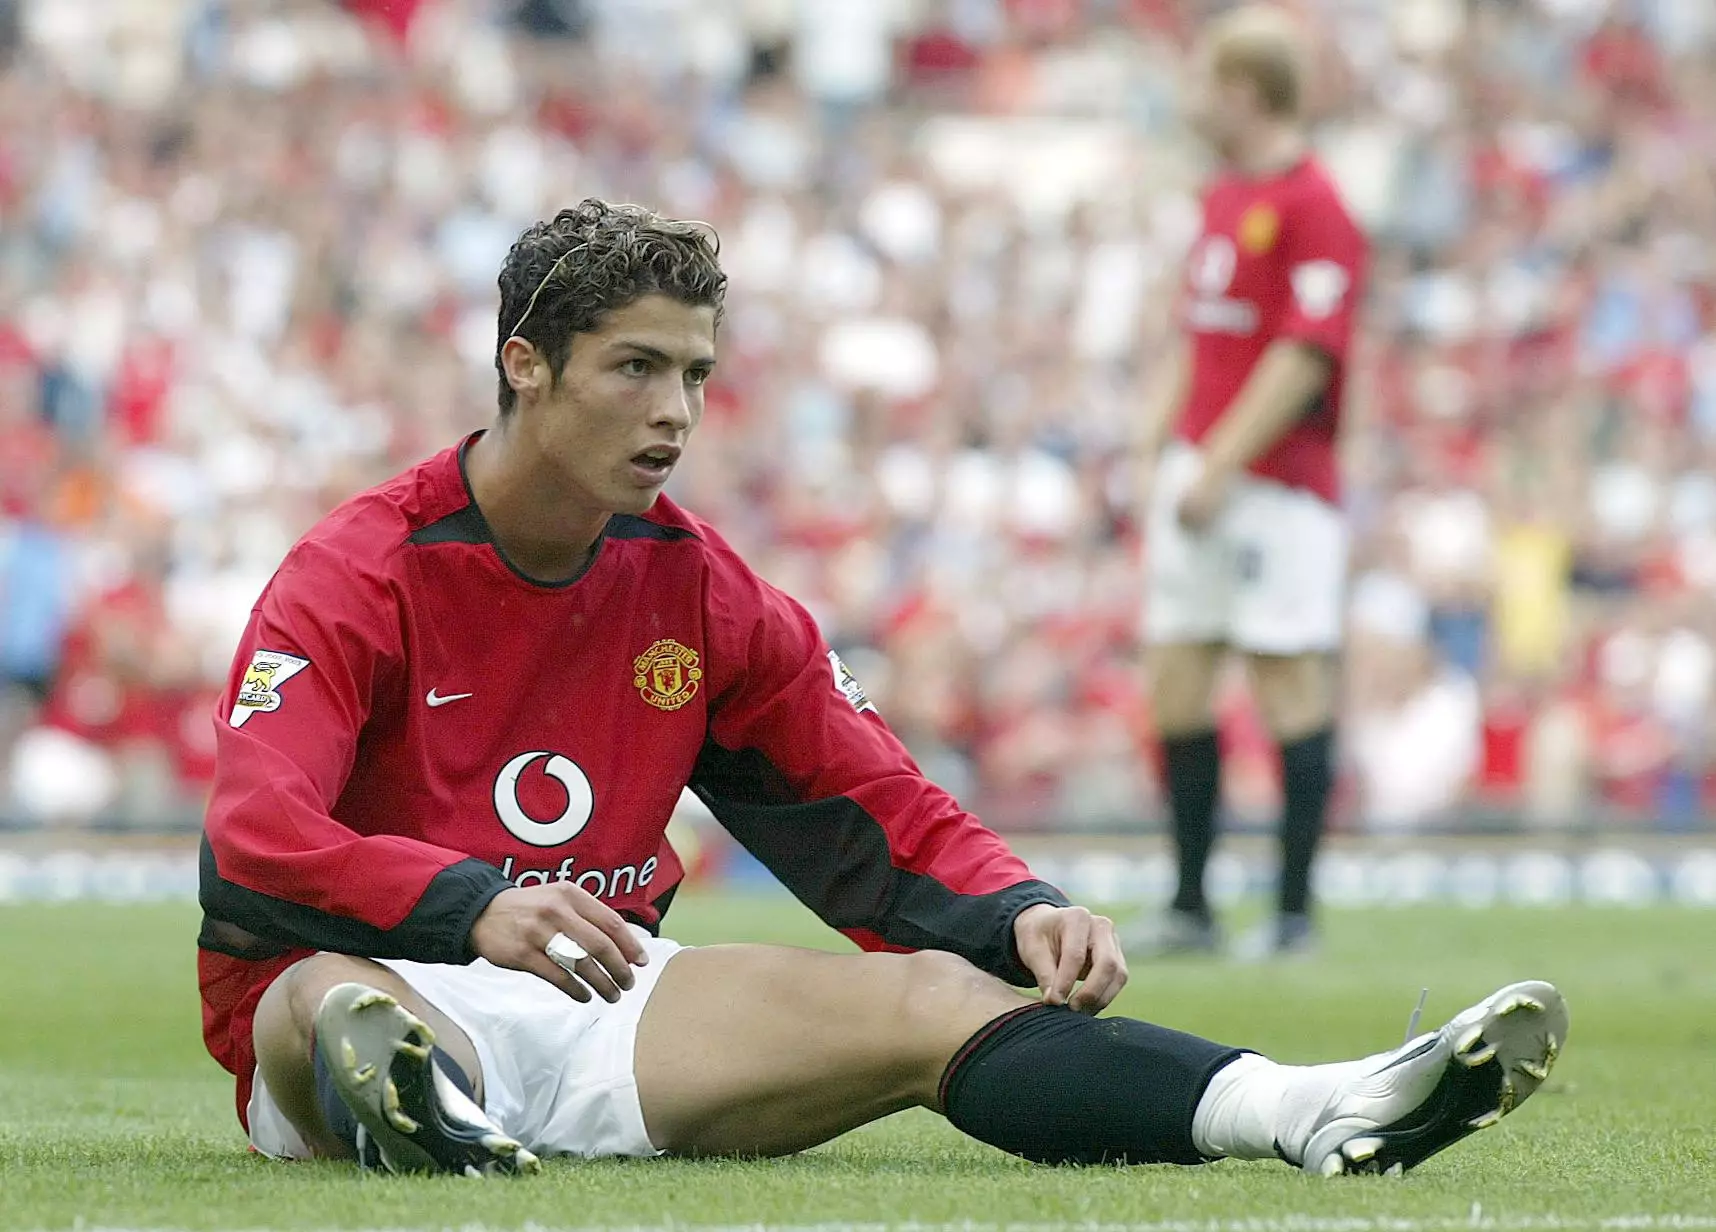 Manchester Uniteds new signing Cristiano Ronaldo after winning his team a penalty in 2003.